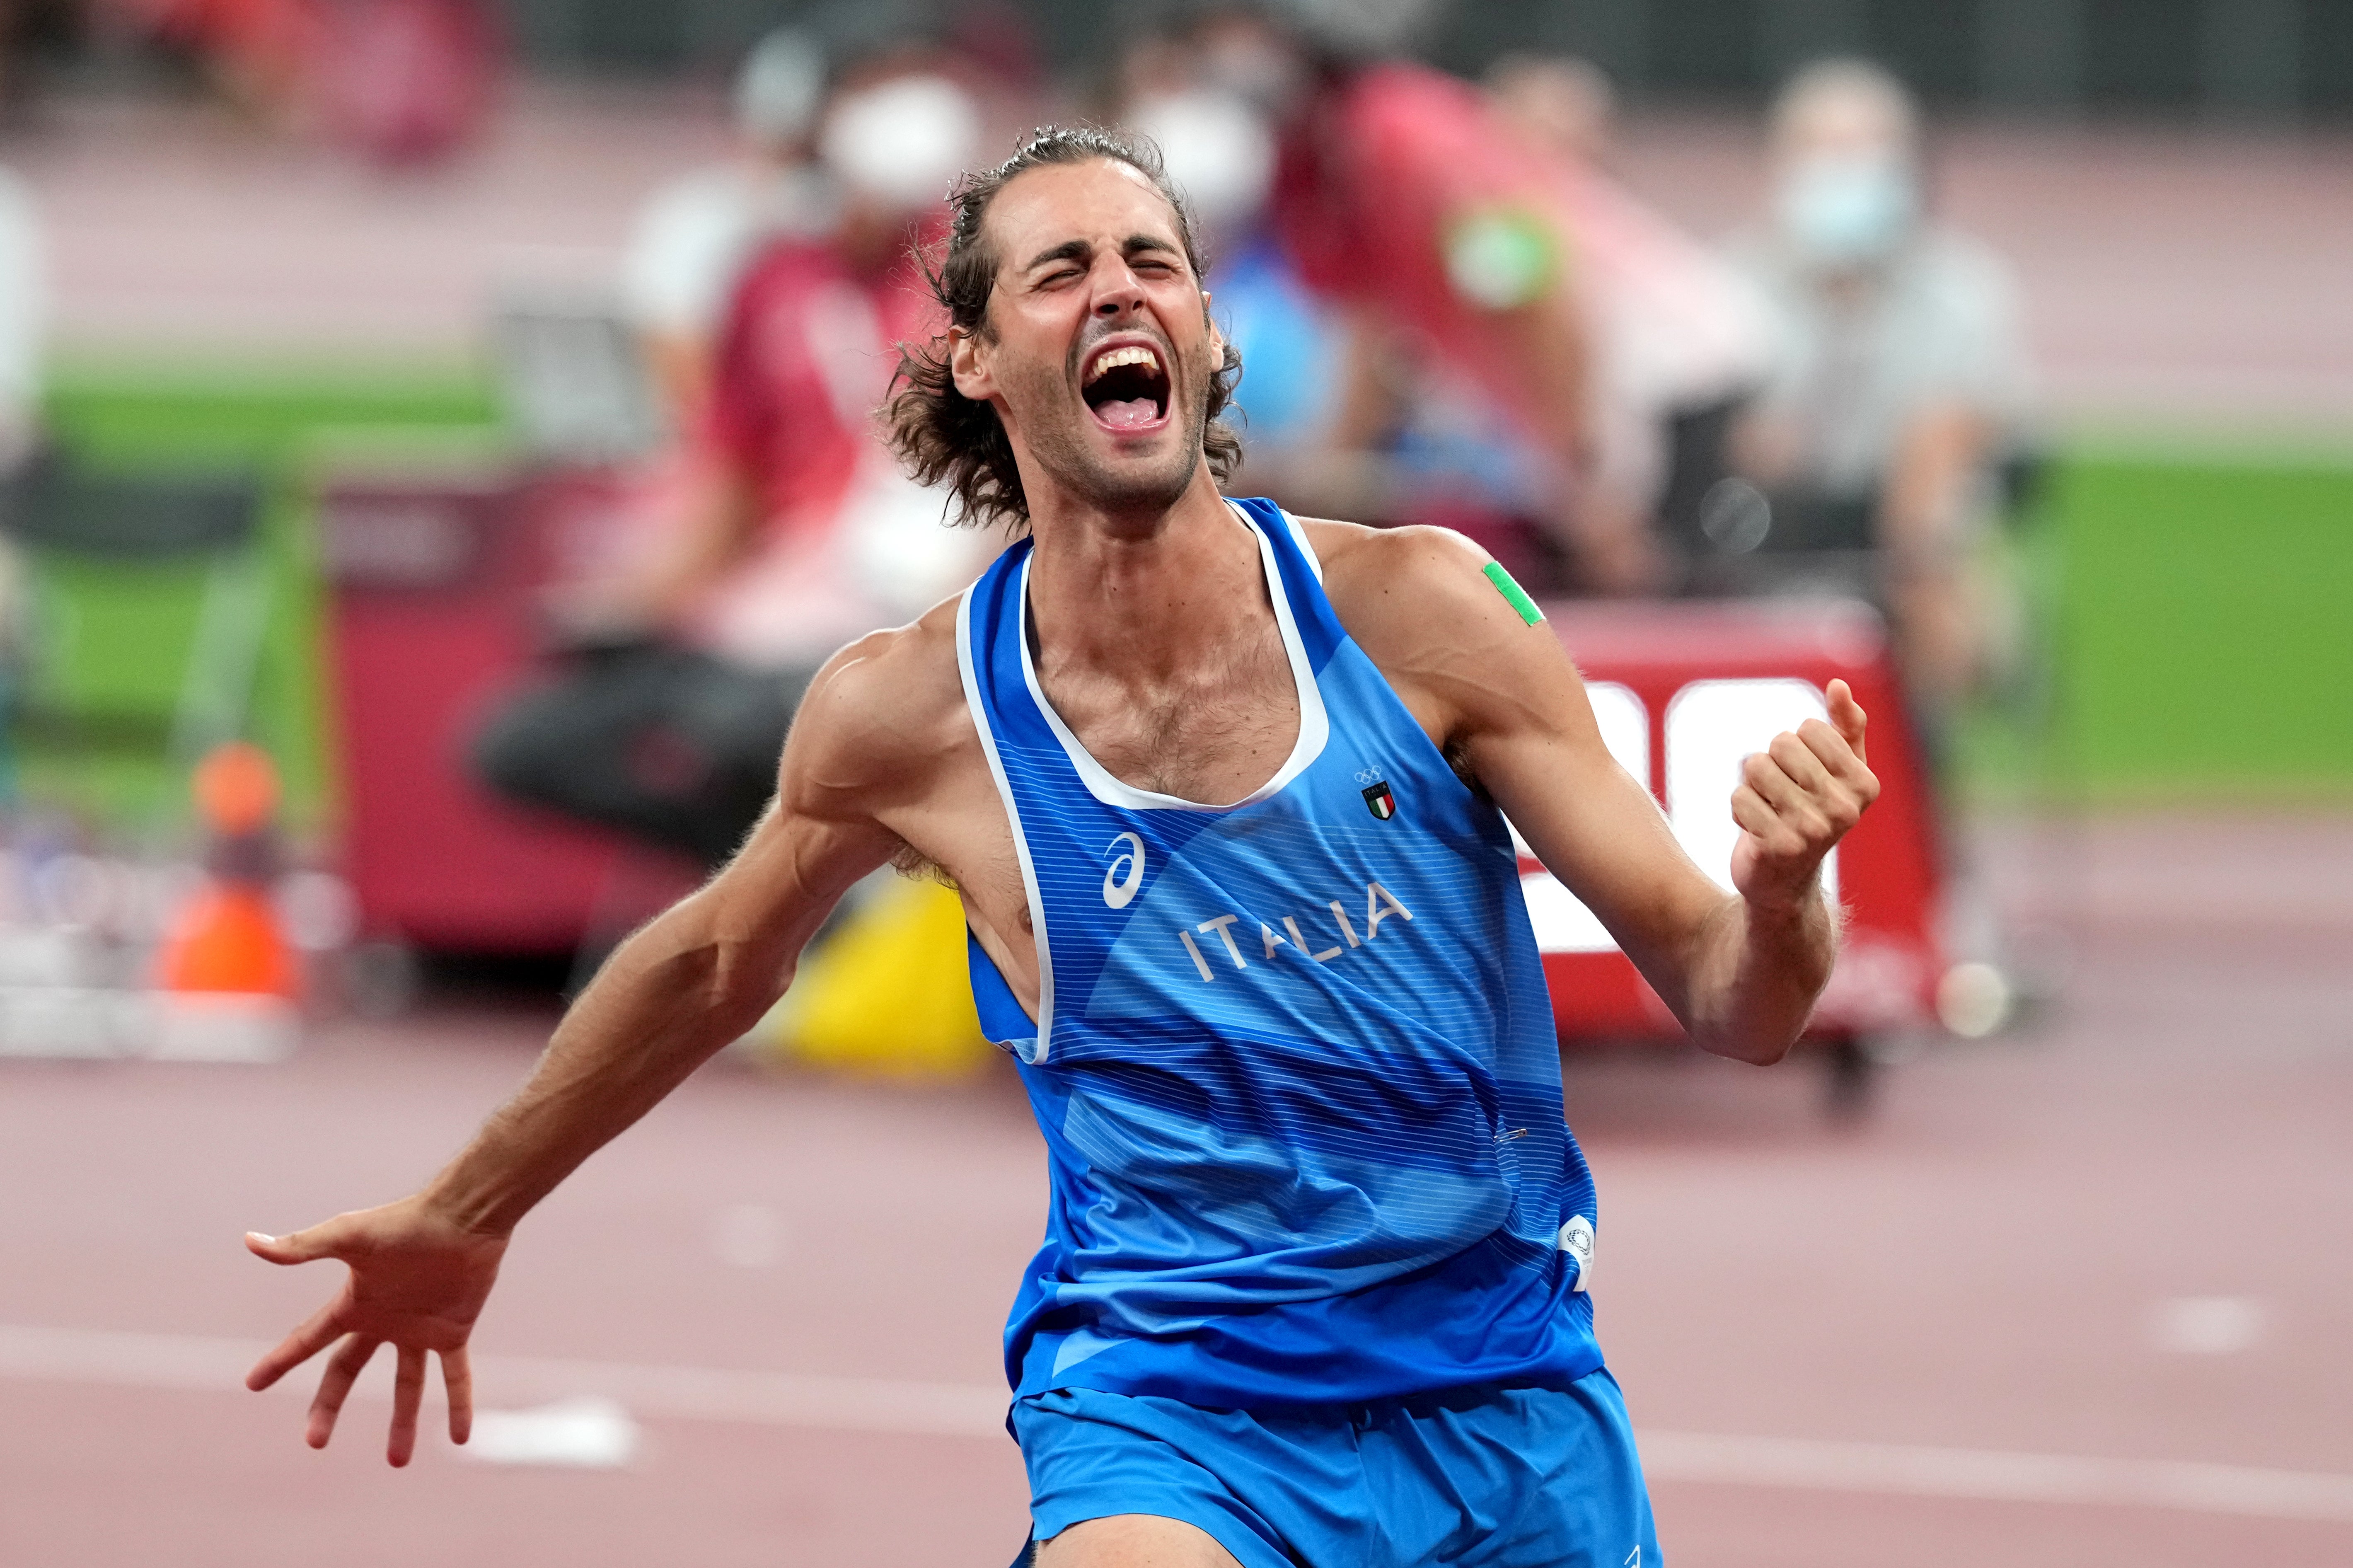 Italy’s Gianmarco Tamberi celebrated his ‘joint’ gold medal in the high jump (Martin Rickett/PA)